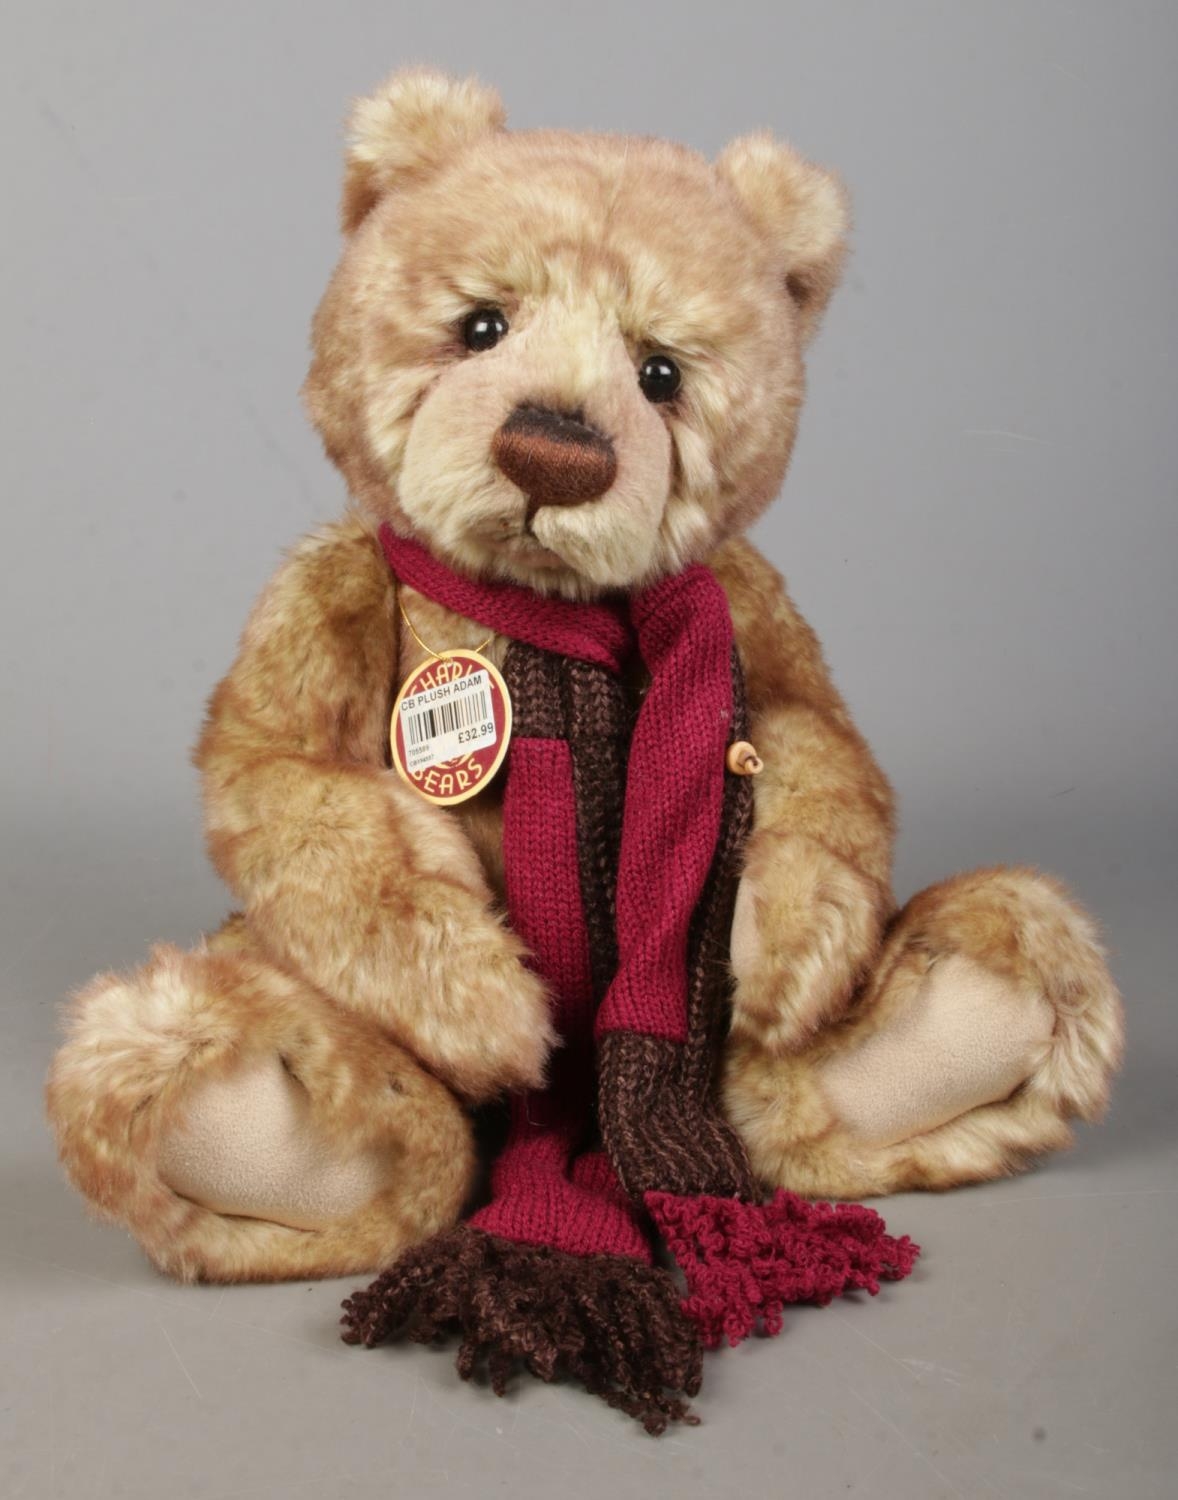 A Charlie Bears jointed teddy bear, Adam. Exclusively designed by Isabella Lee. With scarf and